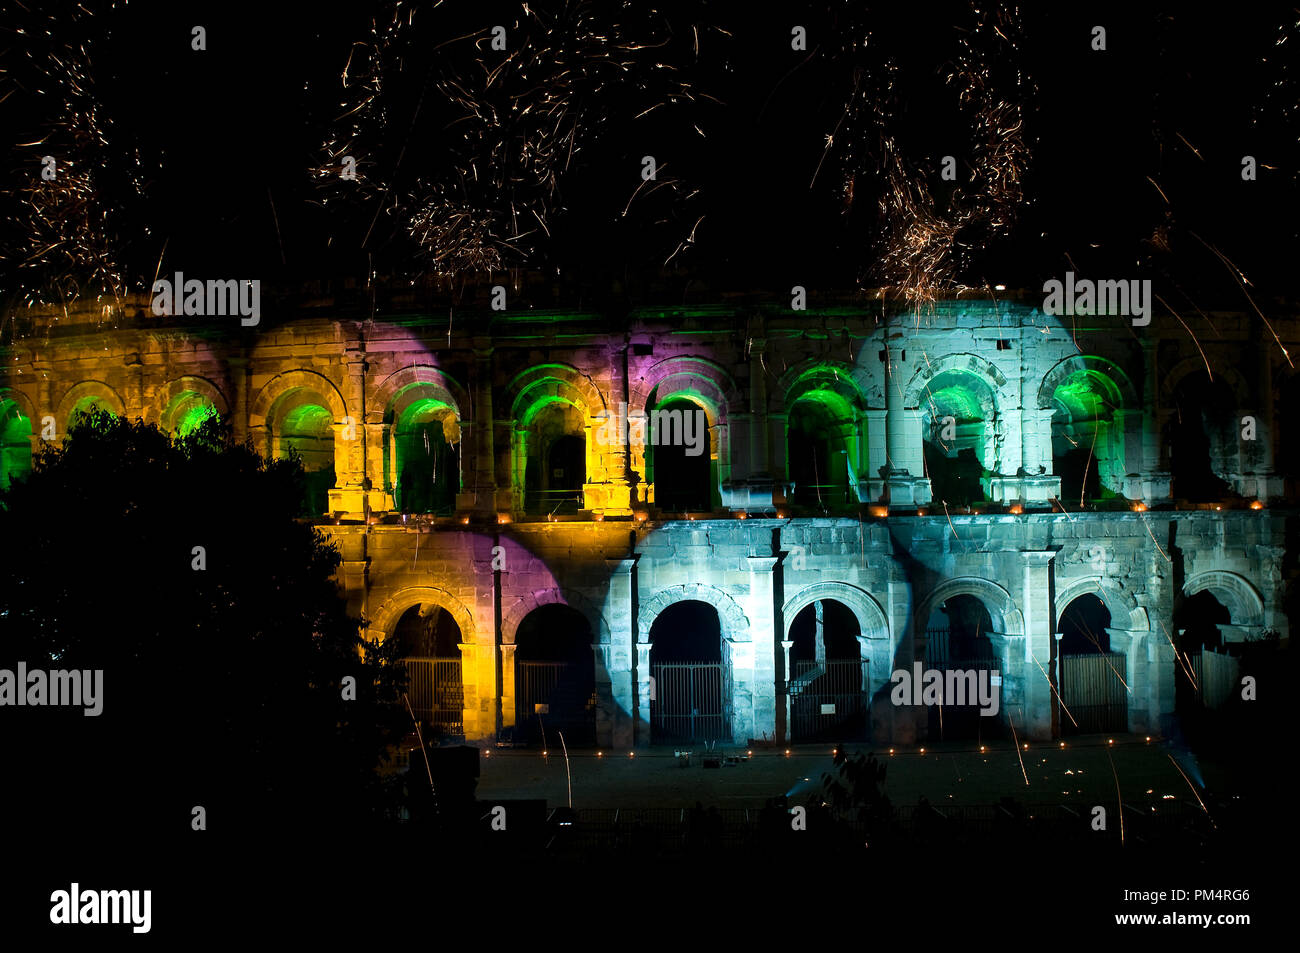 France - Gard (30) Arenas of Nimes - Gard (30) - Fireworks and set of lights for the 14 july Stock Photo